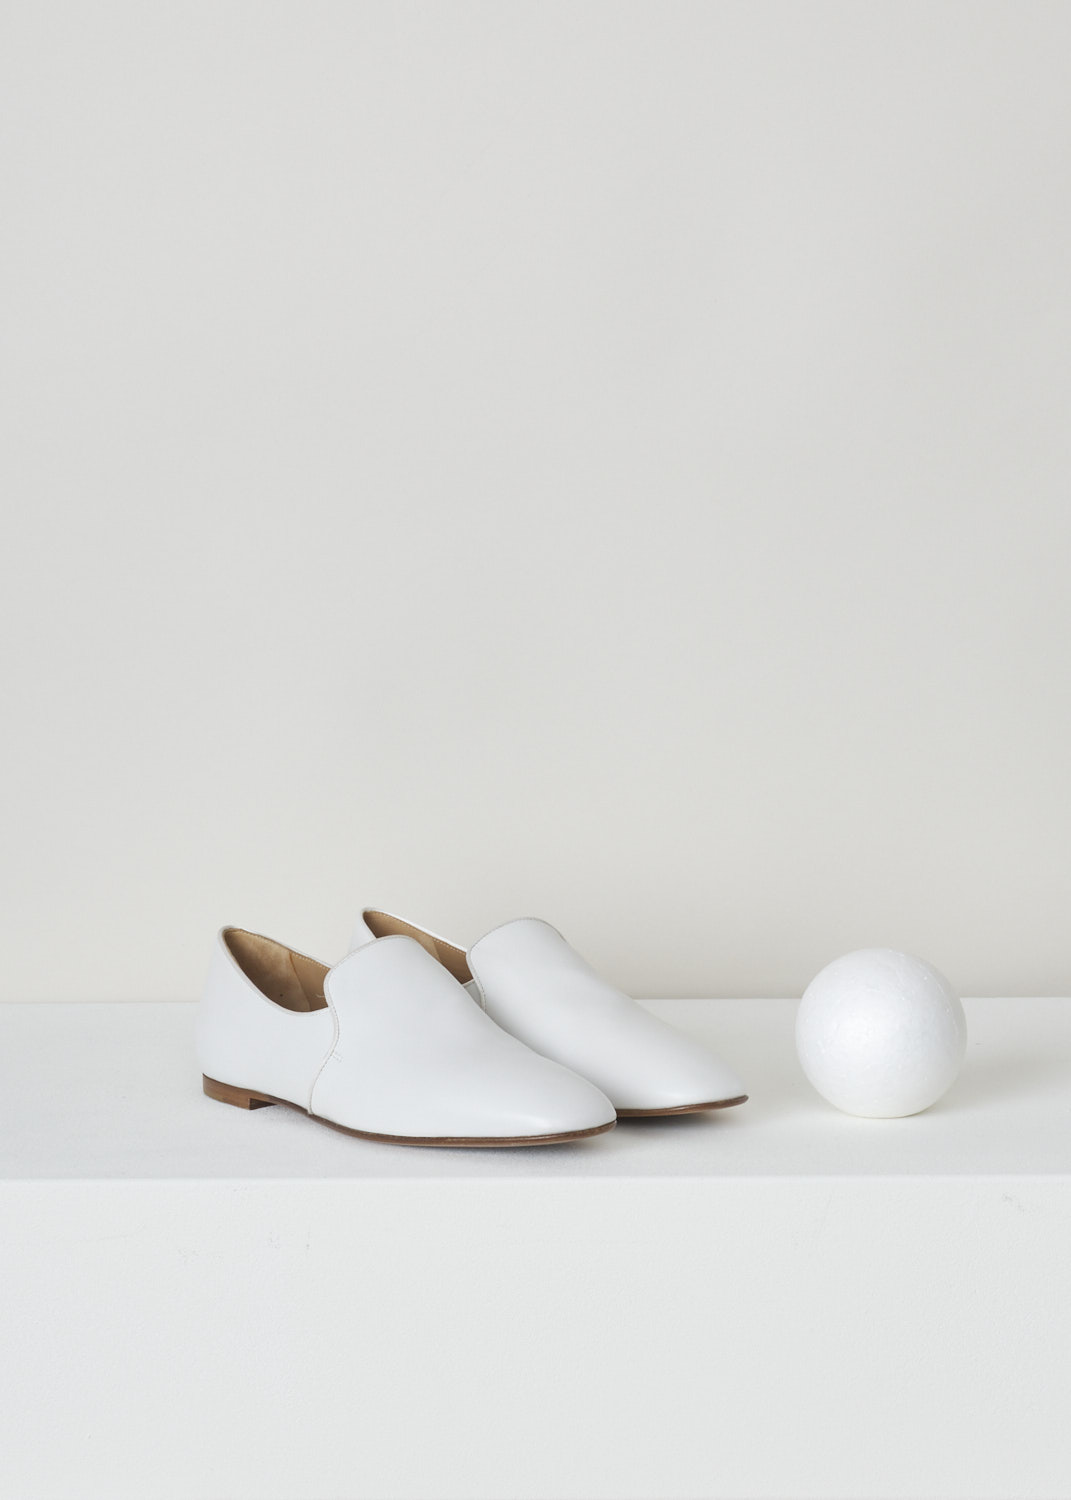 The Row, White leather alys slipper, F1005_L64_WHT, white, front, Made from a minimalist perspective, and crafted out of butter-soft calfskin. Featuring a rounded toe vamp and comes with white satin piping on the topline. The seamless lining ensures they can be worn with or without socks.